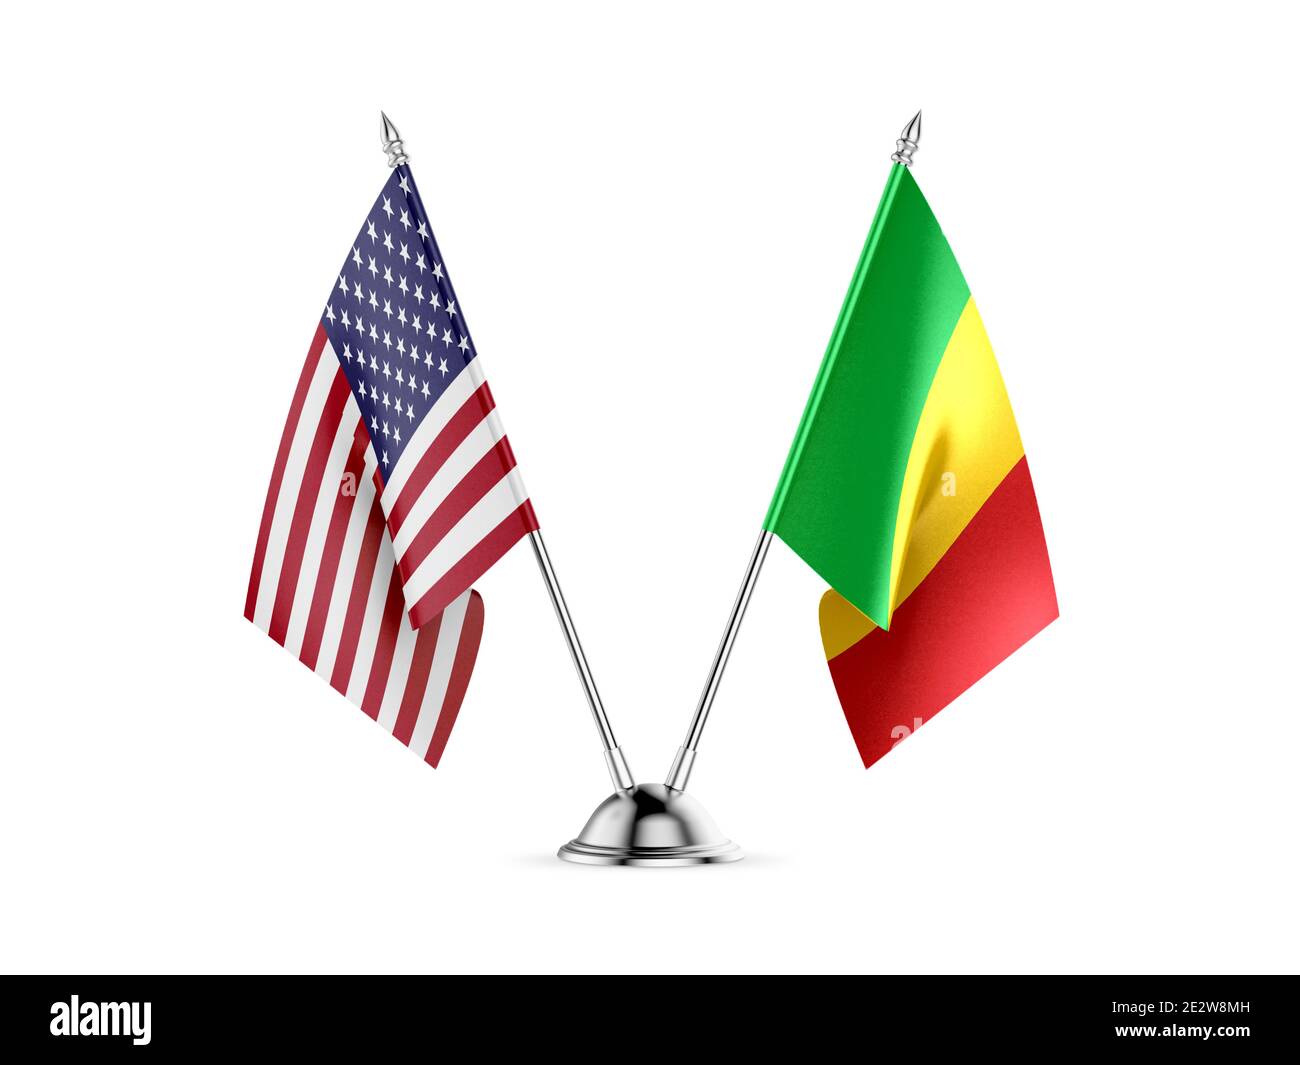 Desk flags, United States  America  and Mali, isolated on white background. 3d image Stock Photo